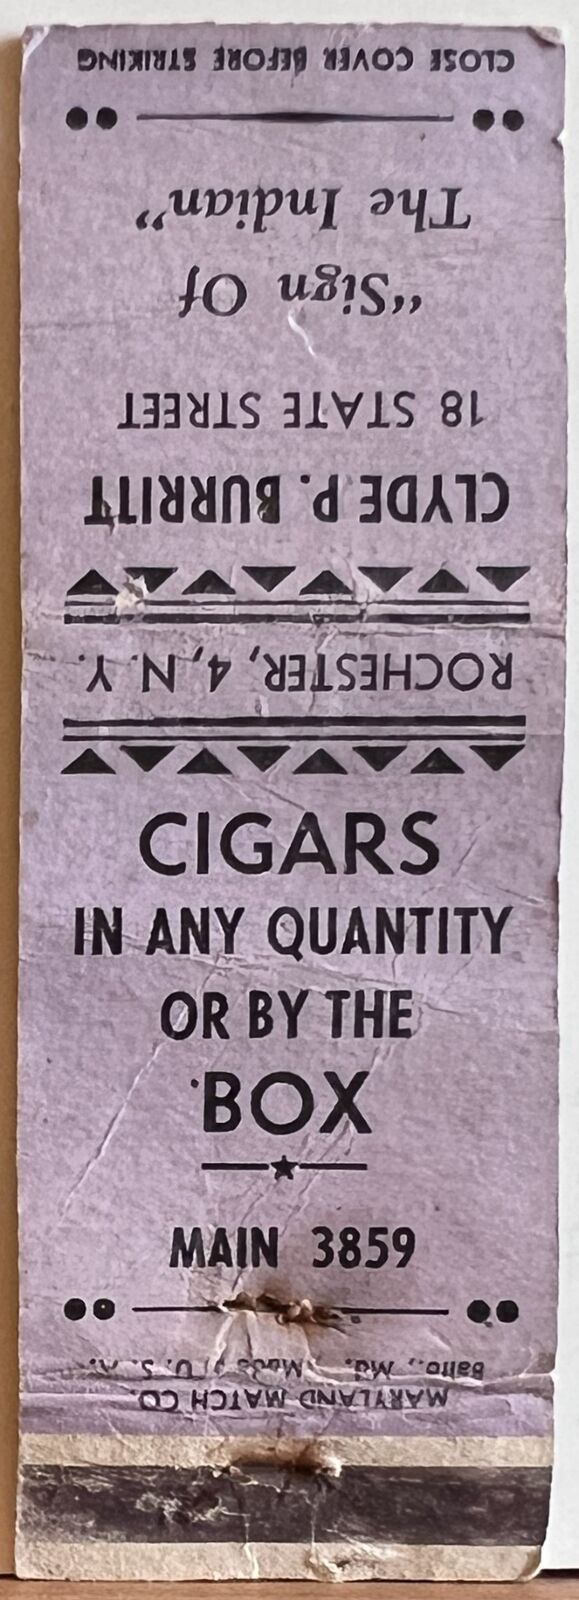 Clyde P Burritt Rochester NY New York Cigars Pipes Vintage Matchbook Cover